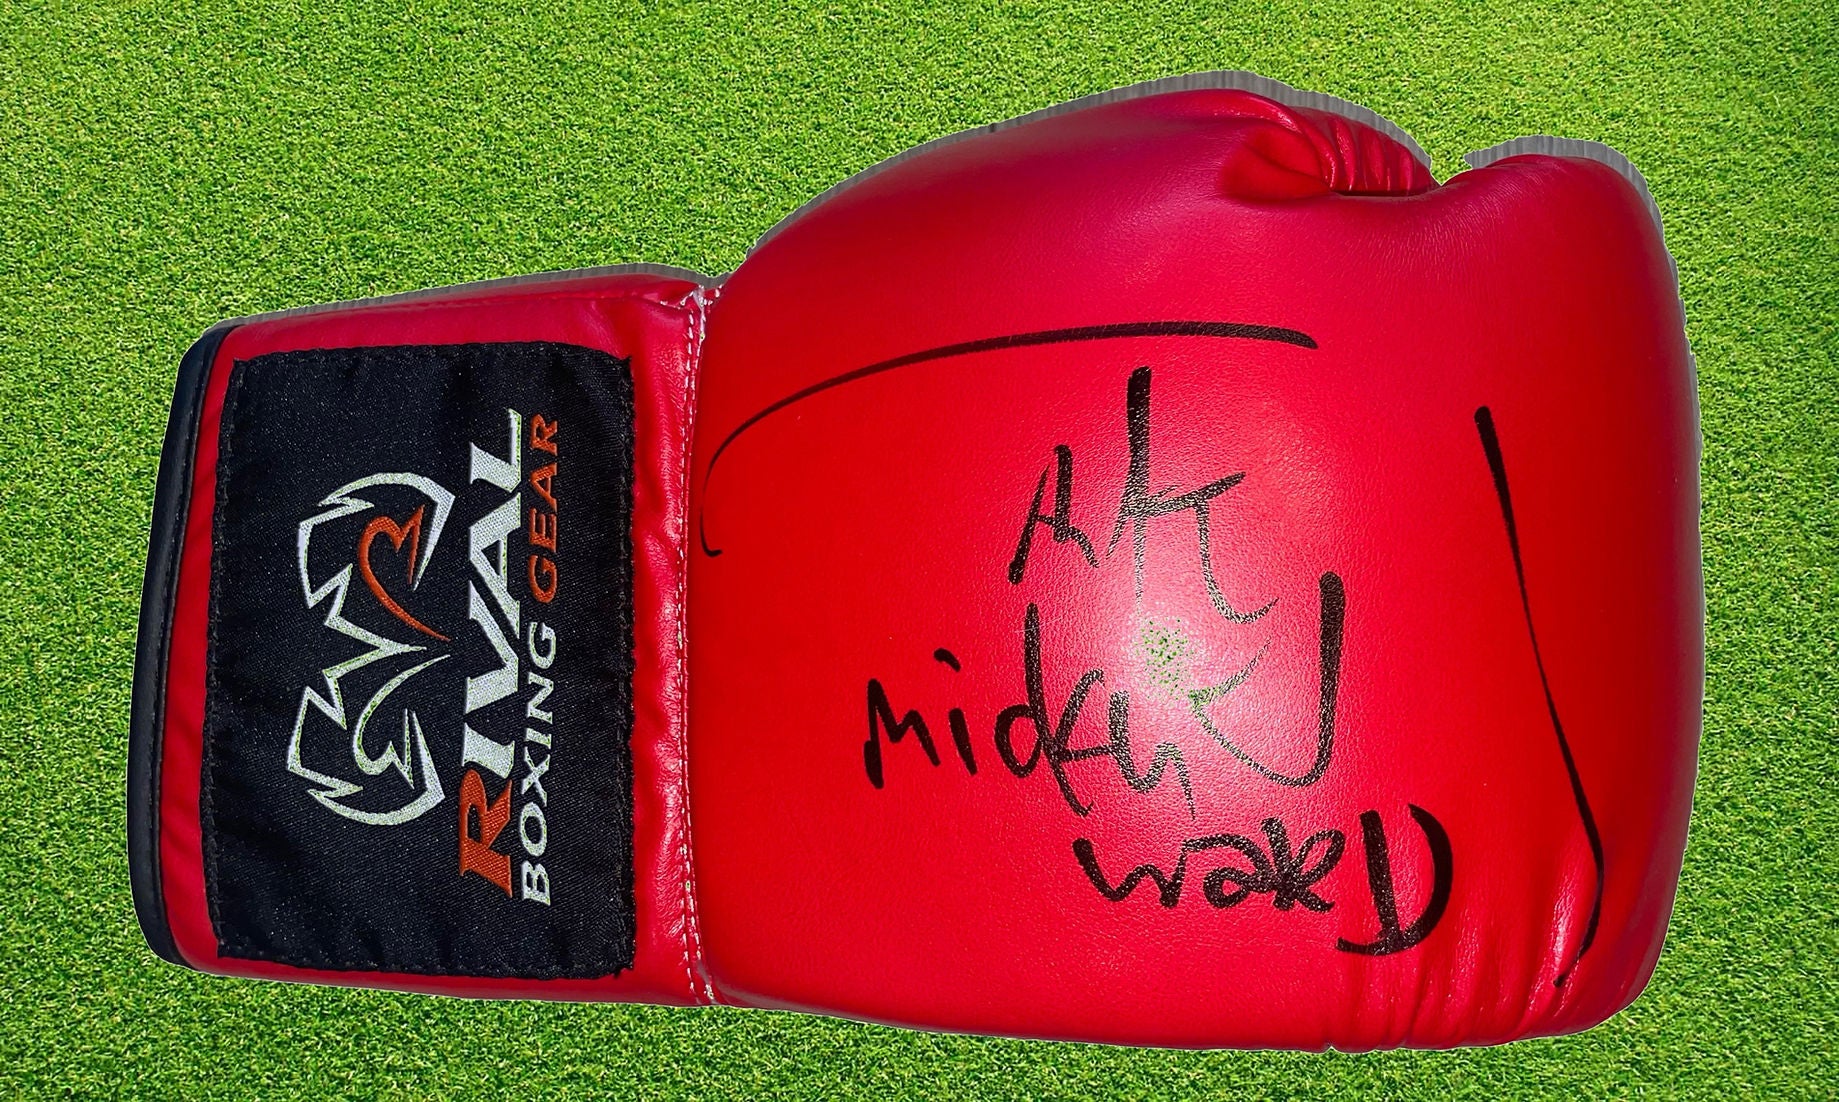 MARK WAHLBERG SIGNED BOXING GLOVE THE FIGHTER MICKY WARD (AFTAL COA)